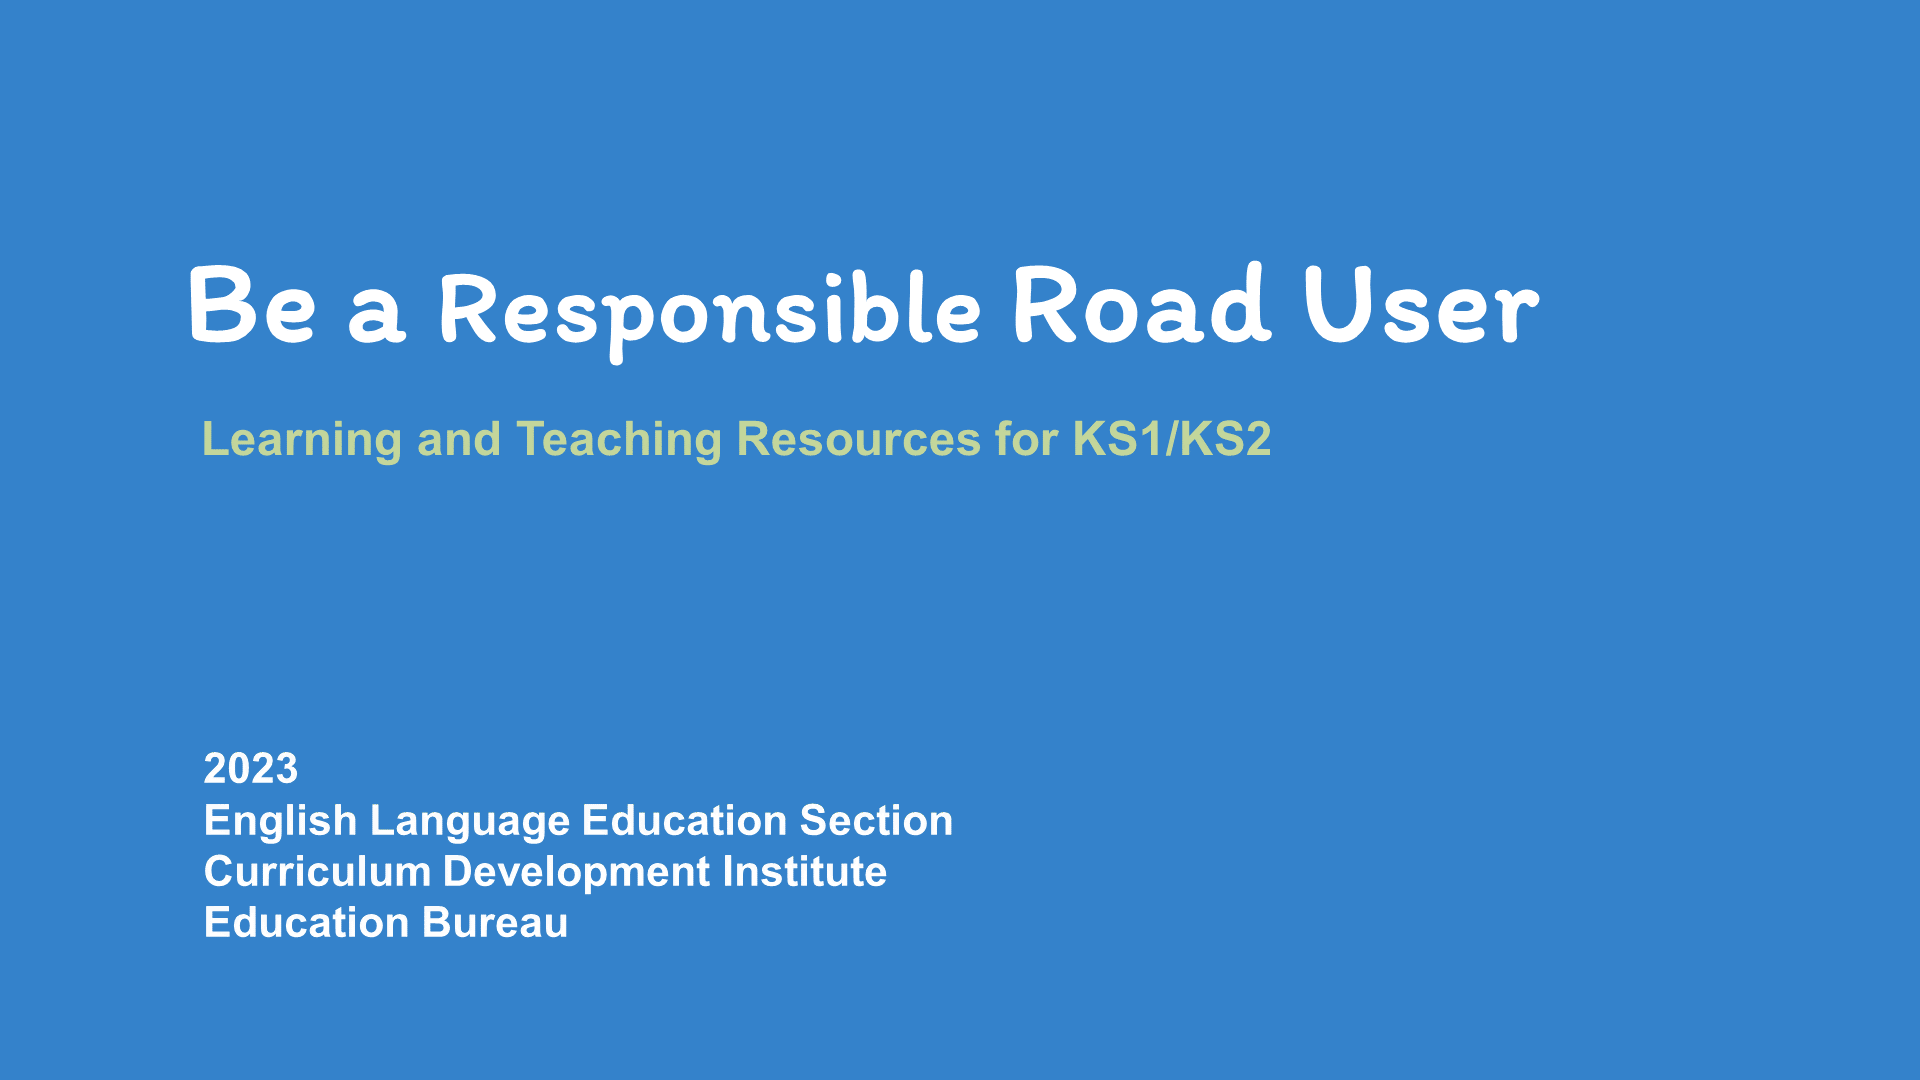 Learning and Teaching Resources on Law Abidingness for KS1/KS2: Be a Responsible Road User